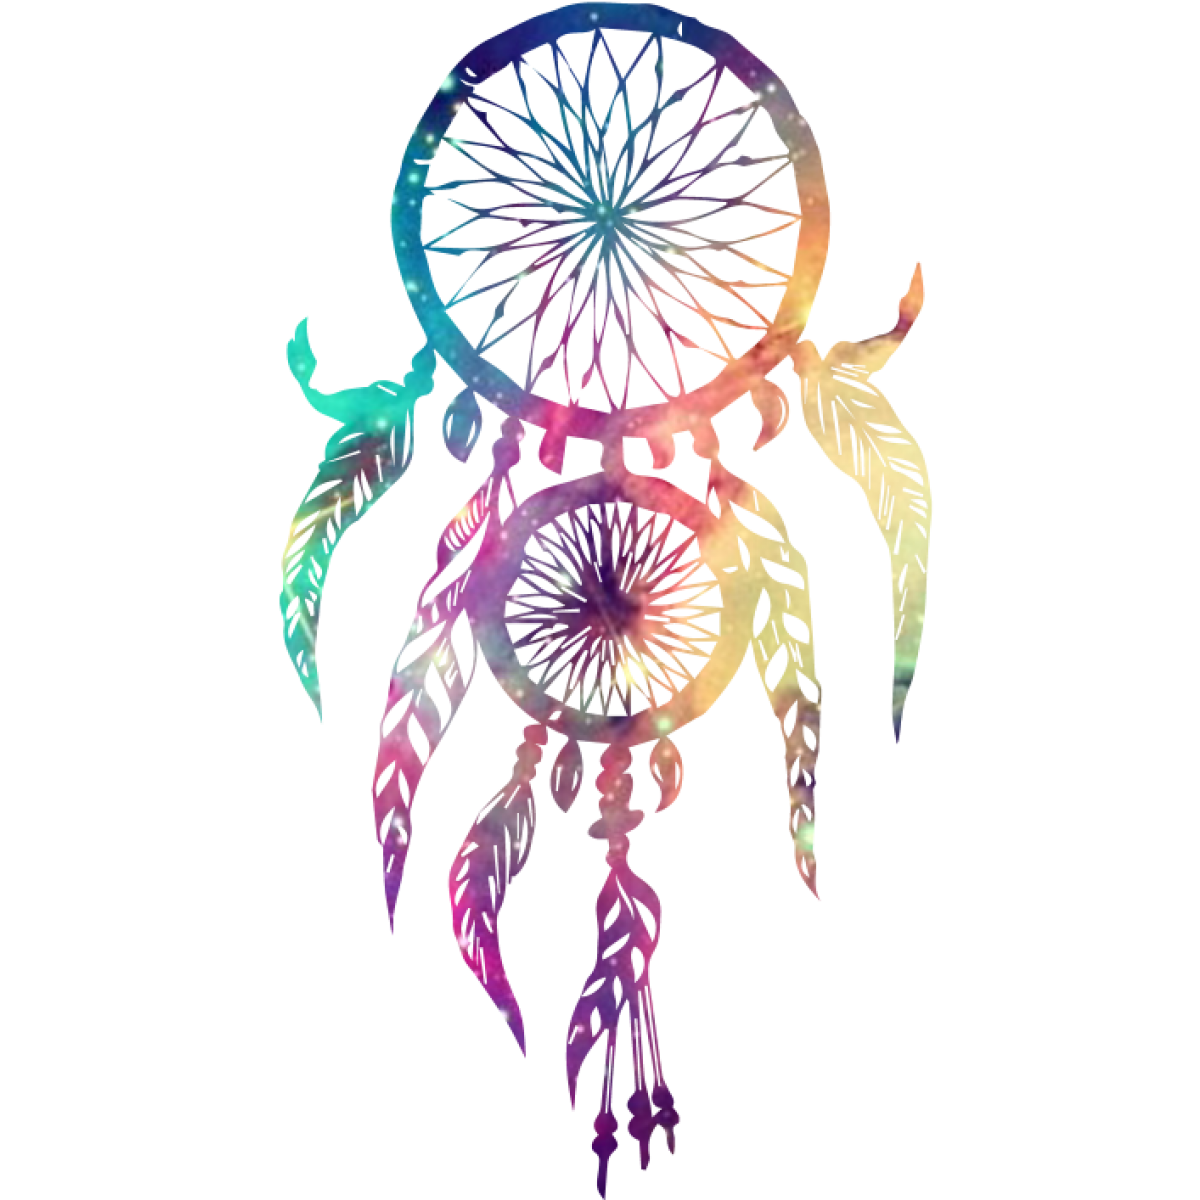 United Dreamcatcher Of In Indigenous States Americans PNG Image